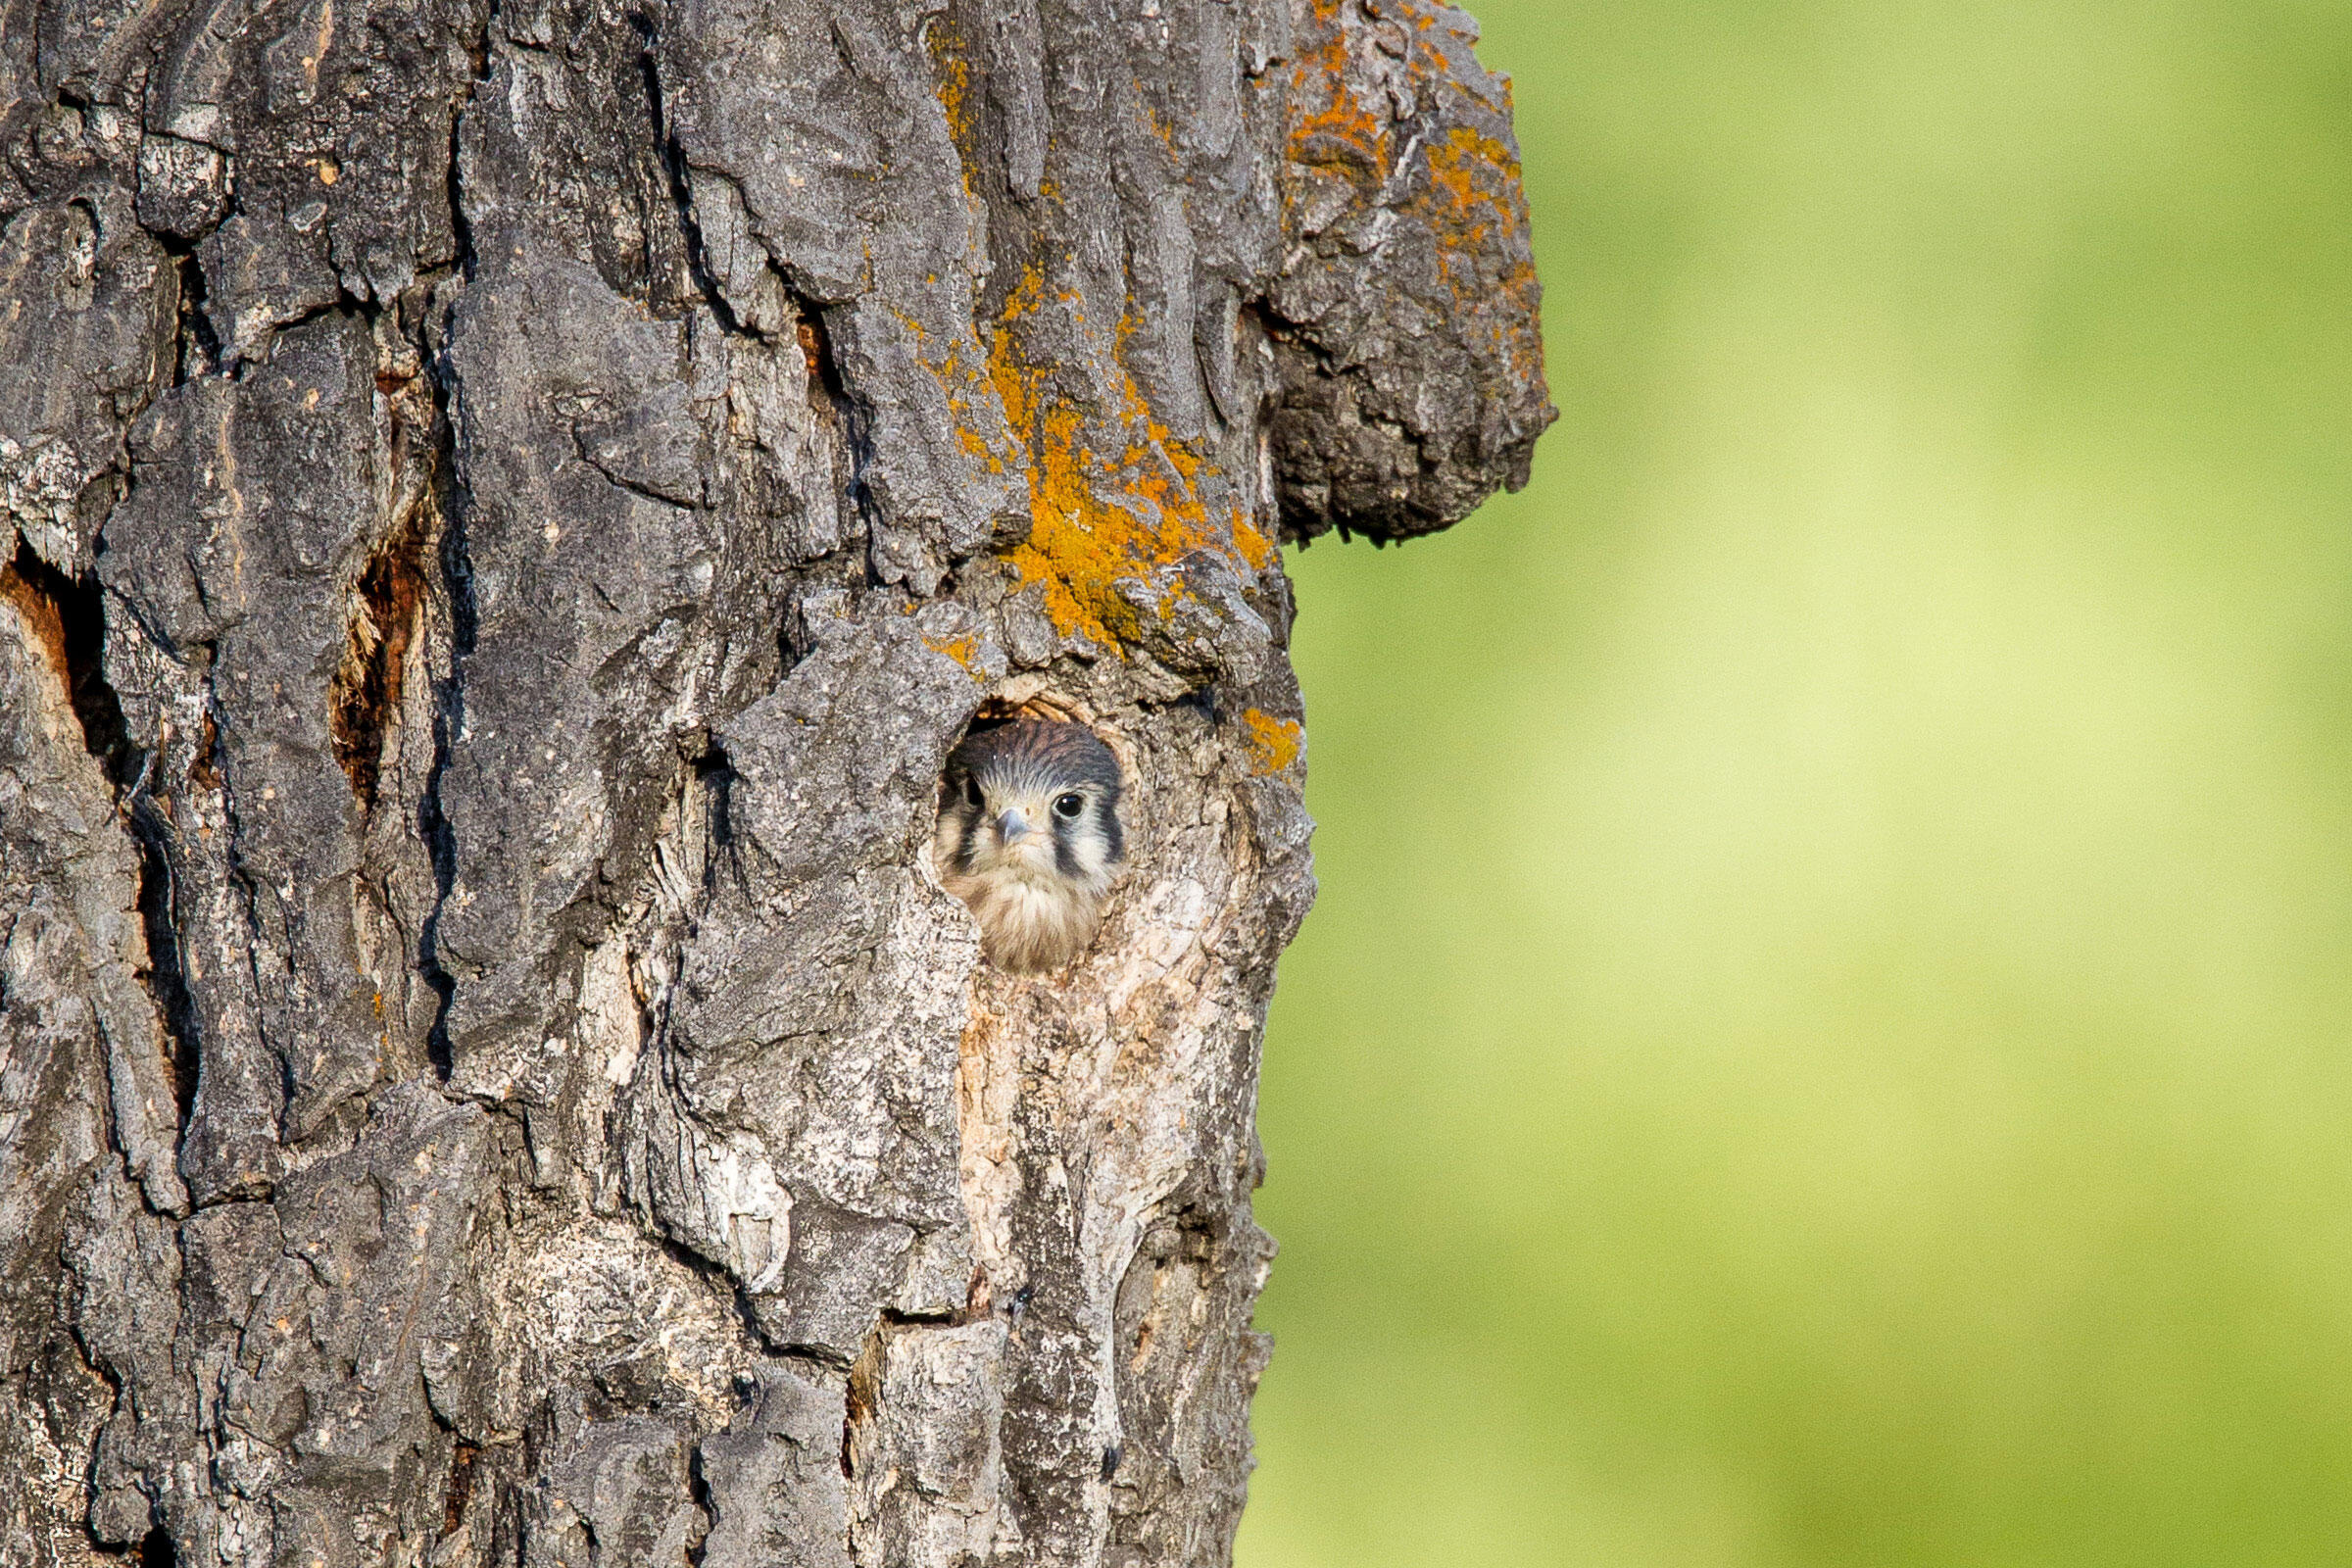 These Amazing Images Show How Good Bird Camouflage Can Be | Audubon